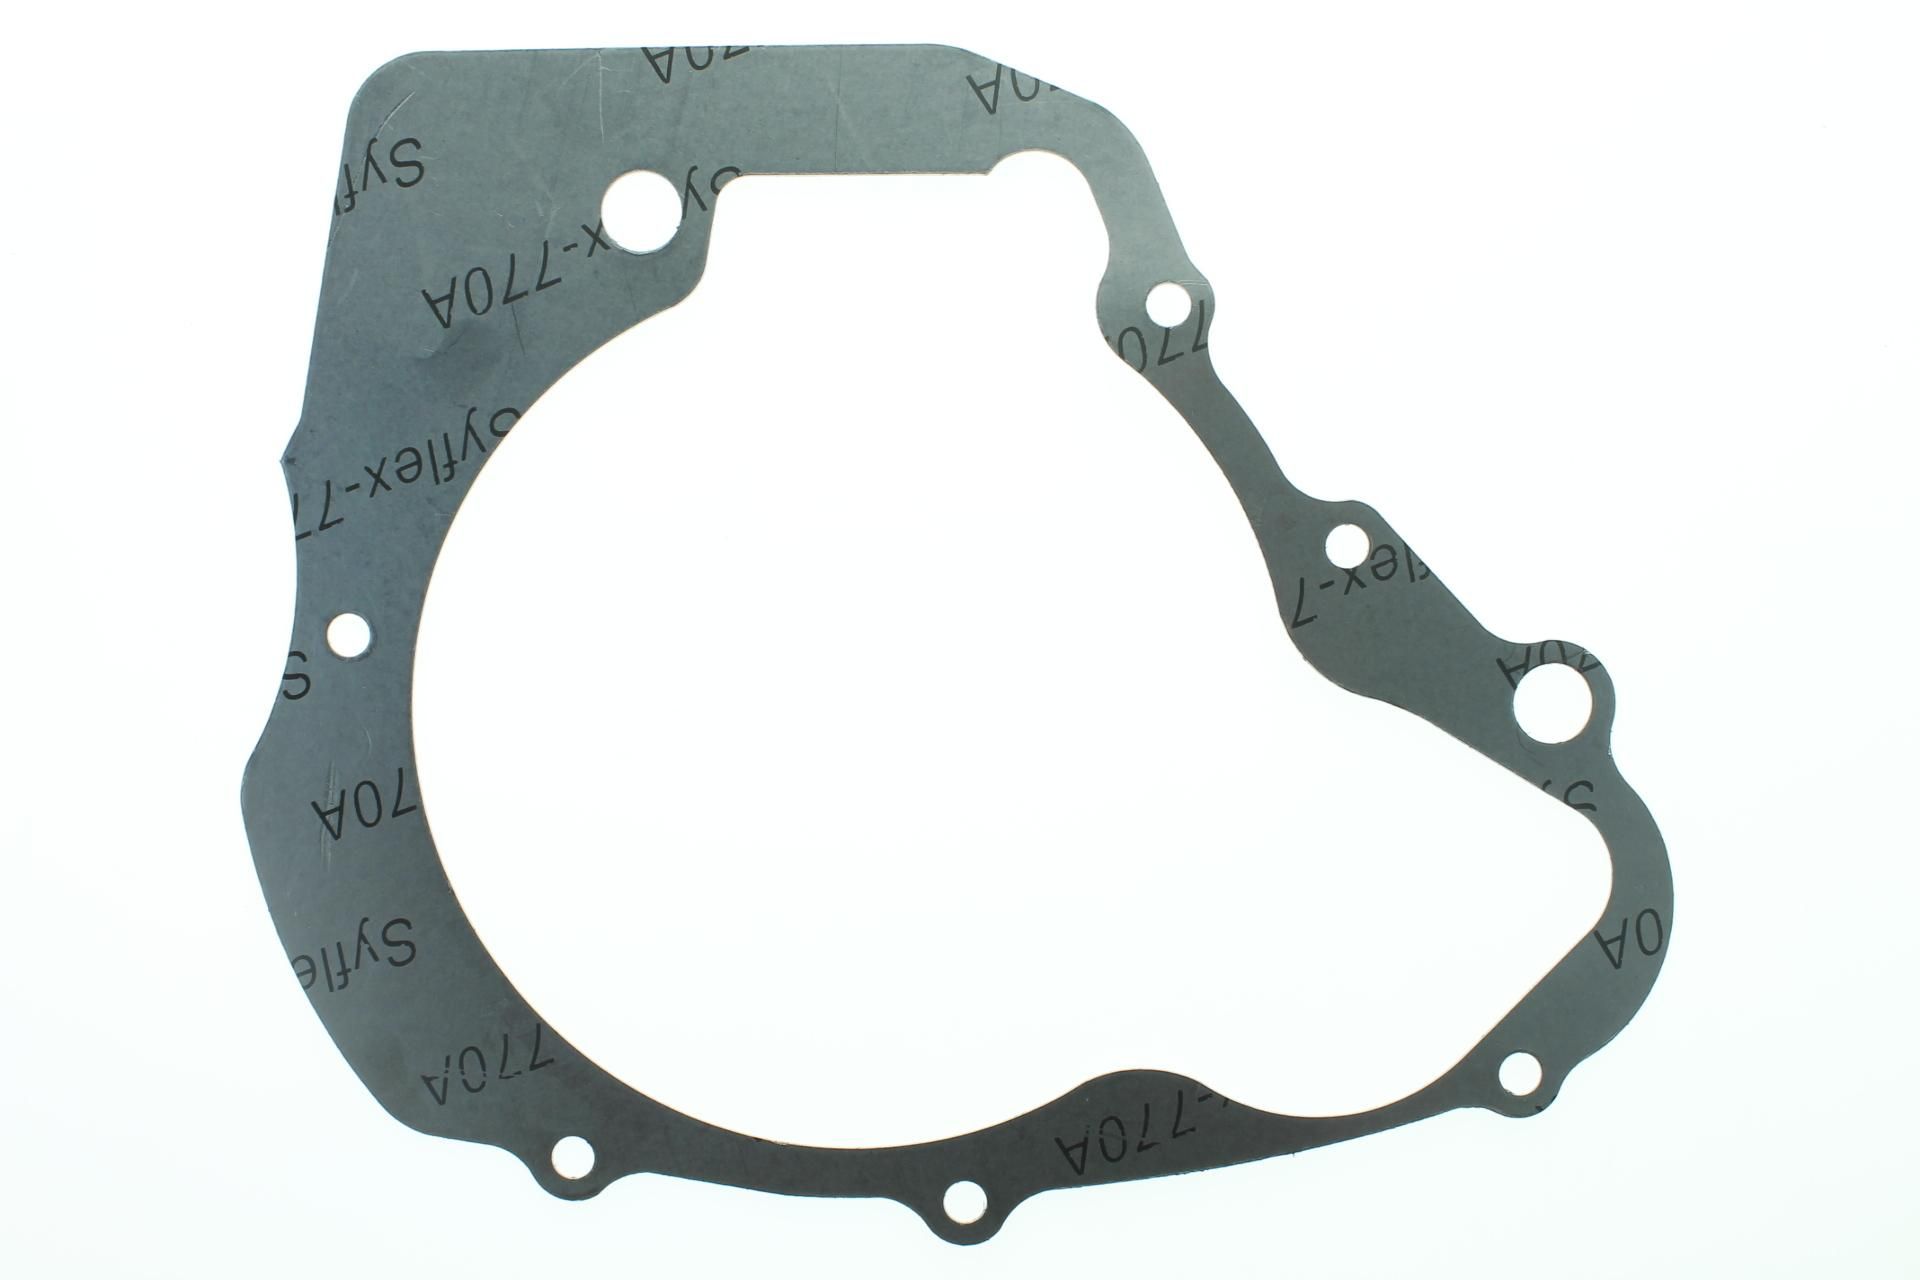 3DM-15451-00-00 Superseded by 4RF-15451-01-00 - GASKET, CRANKCASE CO